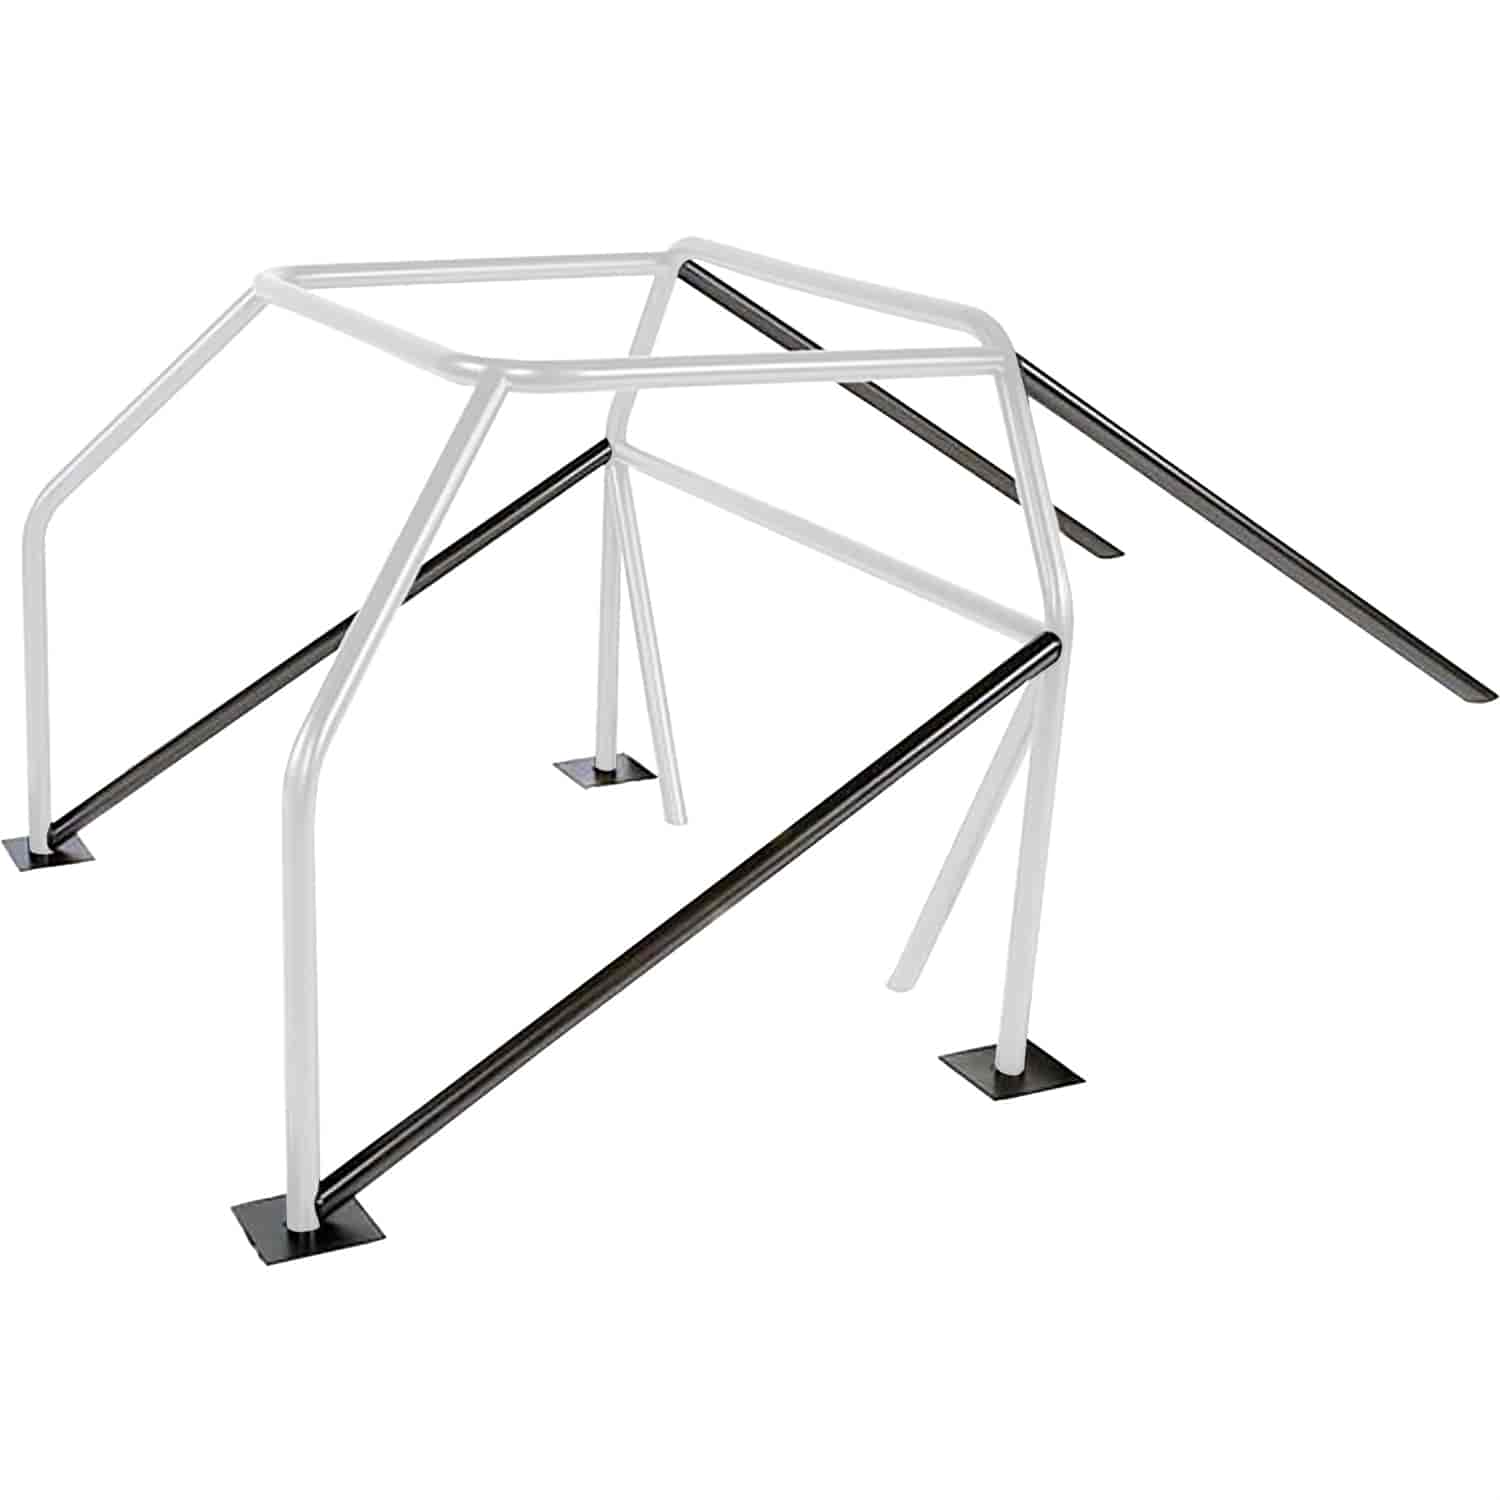 Strut Kit for 10-Point Roll Cage - Universal, Mild Steel